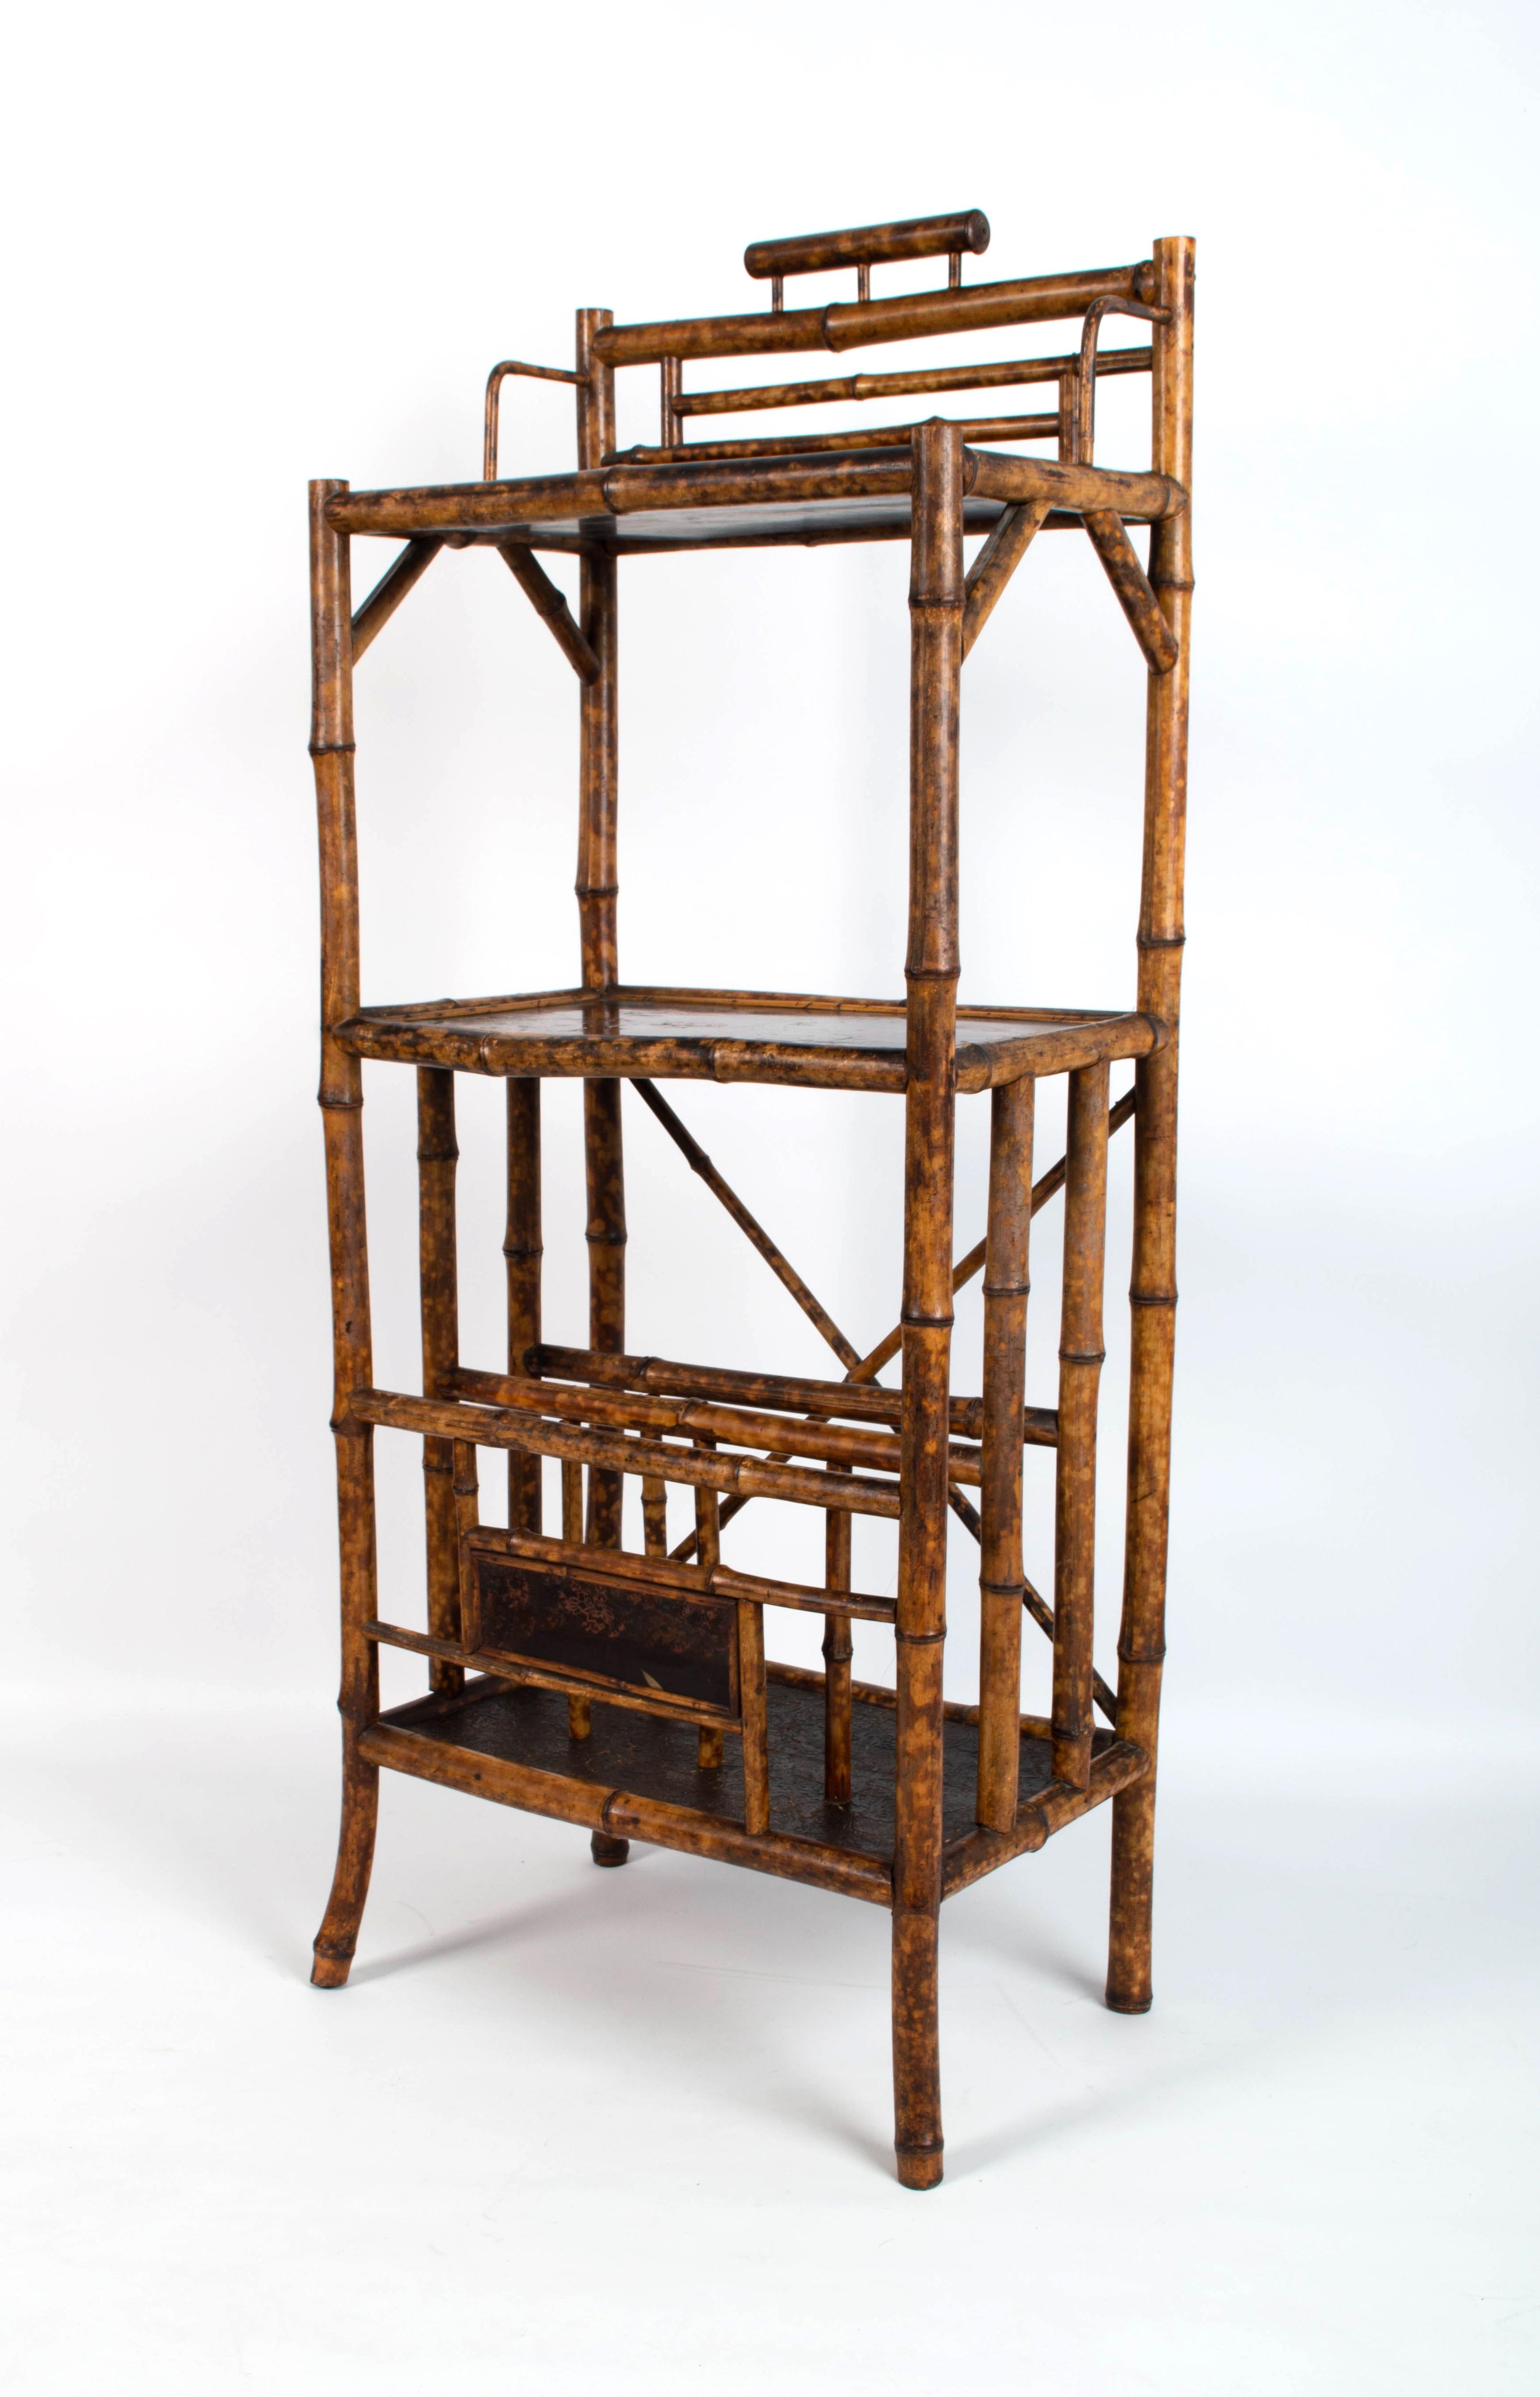 Antique 19th century Anglo-Chinese lacquered bamboo etagere shelves.
C.1880 England

In very good condition, with expected signs of wear commensurate with age.